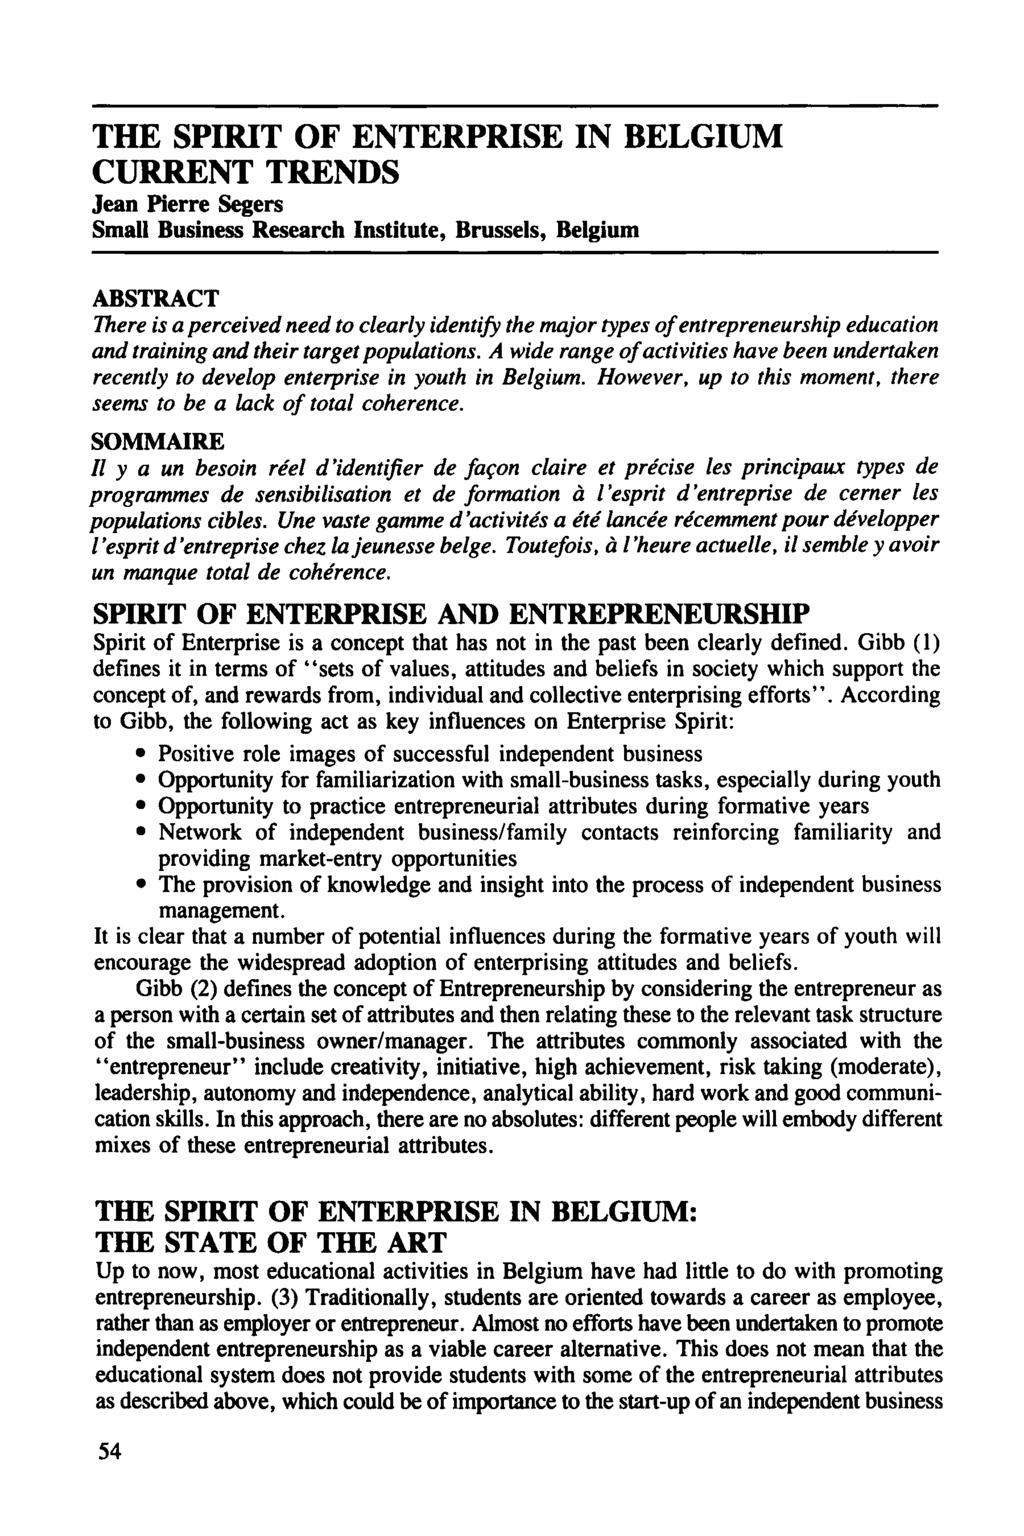 THE SPIRIT OF ENTERPRISE IN BELGIUM CURRENT TRENDS Jean Pierre Segers Small Business Research Institute, Brussels, Belgium Downloaded by [Jean-Pierre Segers] at 14:08 05 January 2014 ABSTRACT There